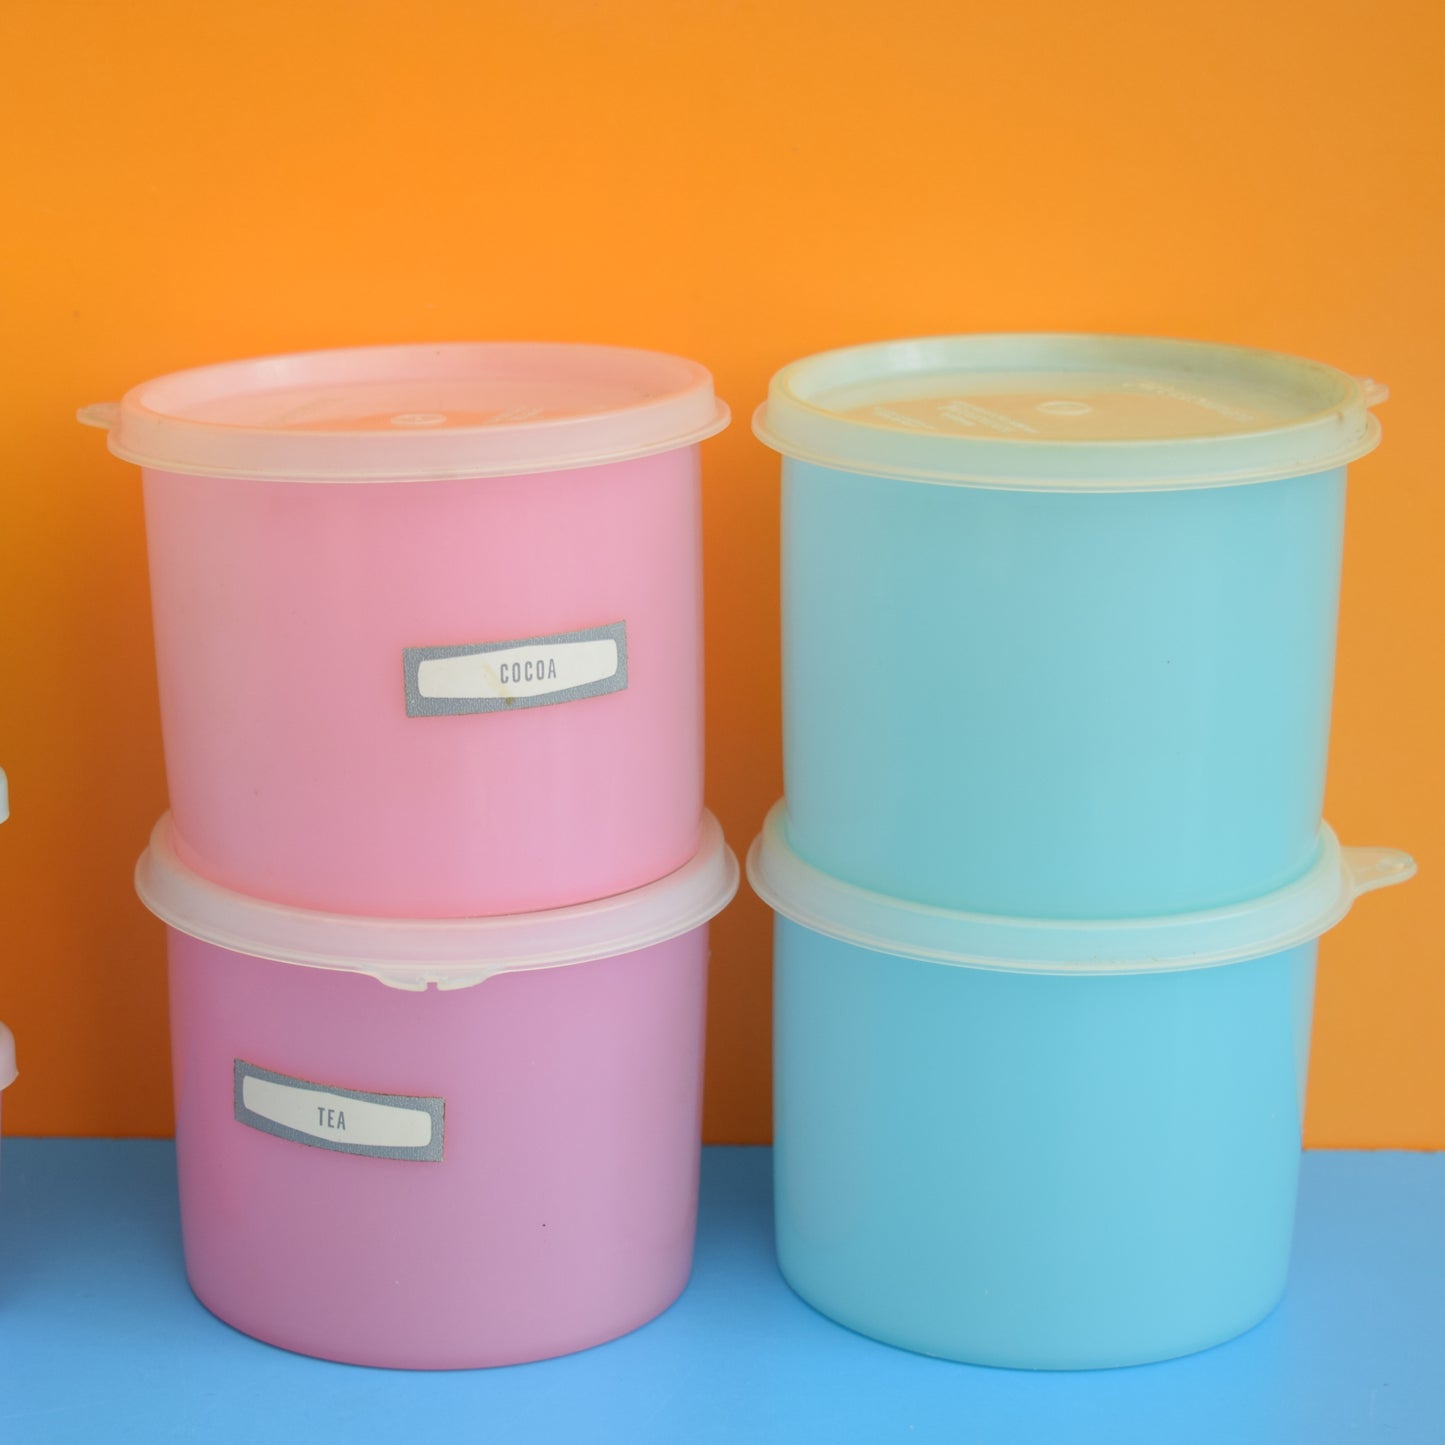 Vintage 1960s Tupperware Containers - Pink/Blue